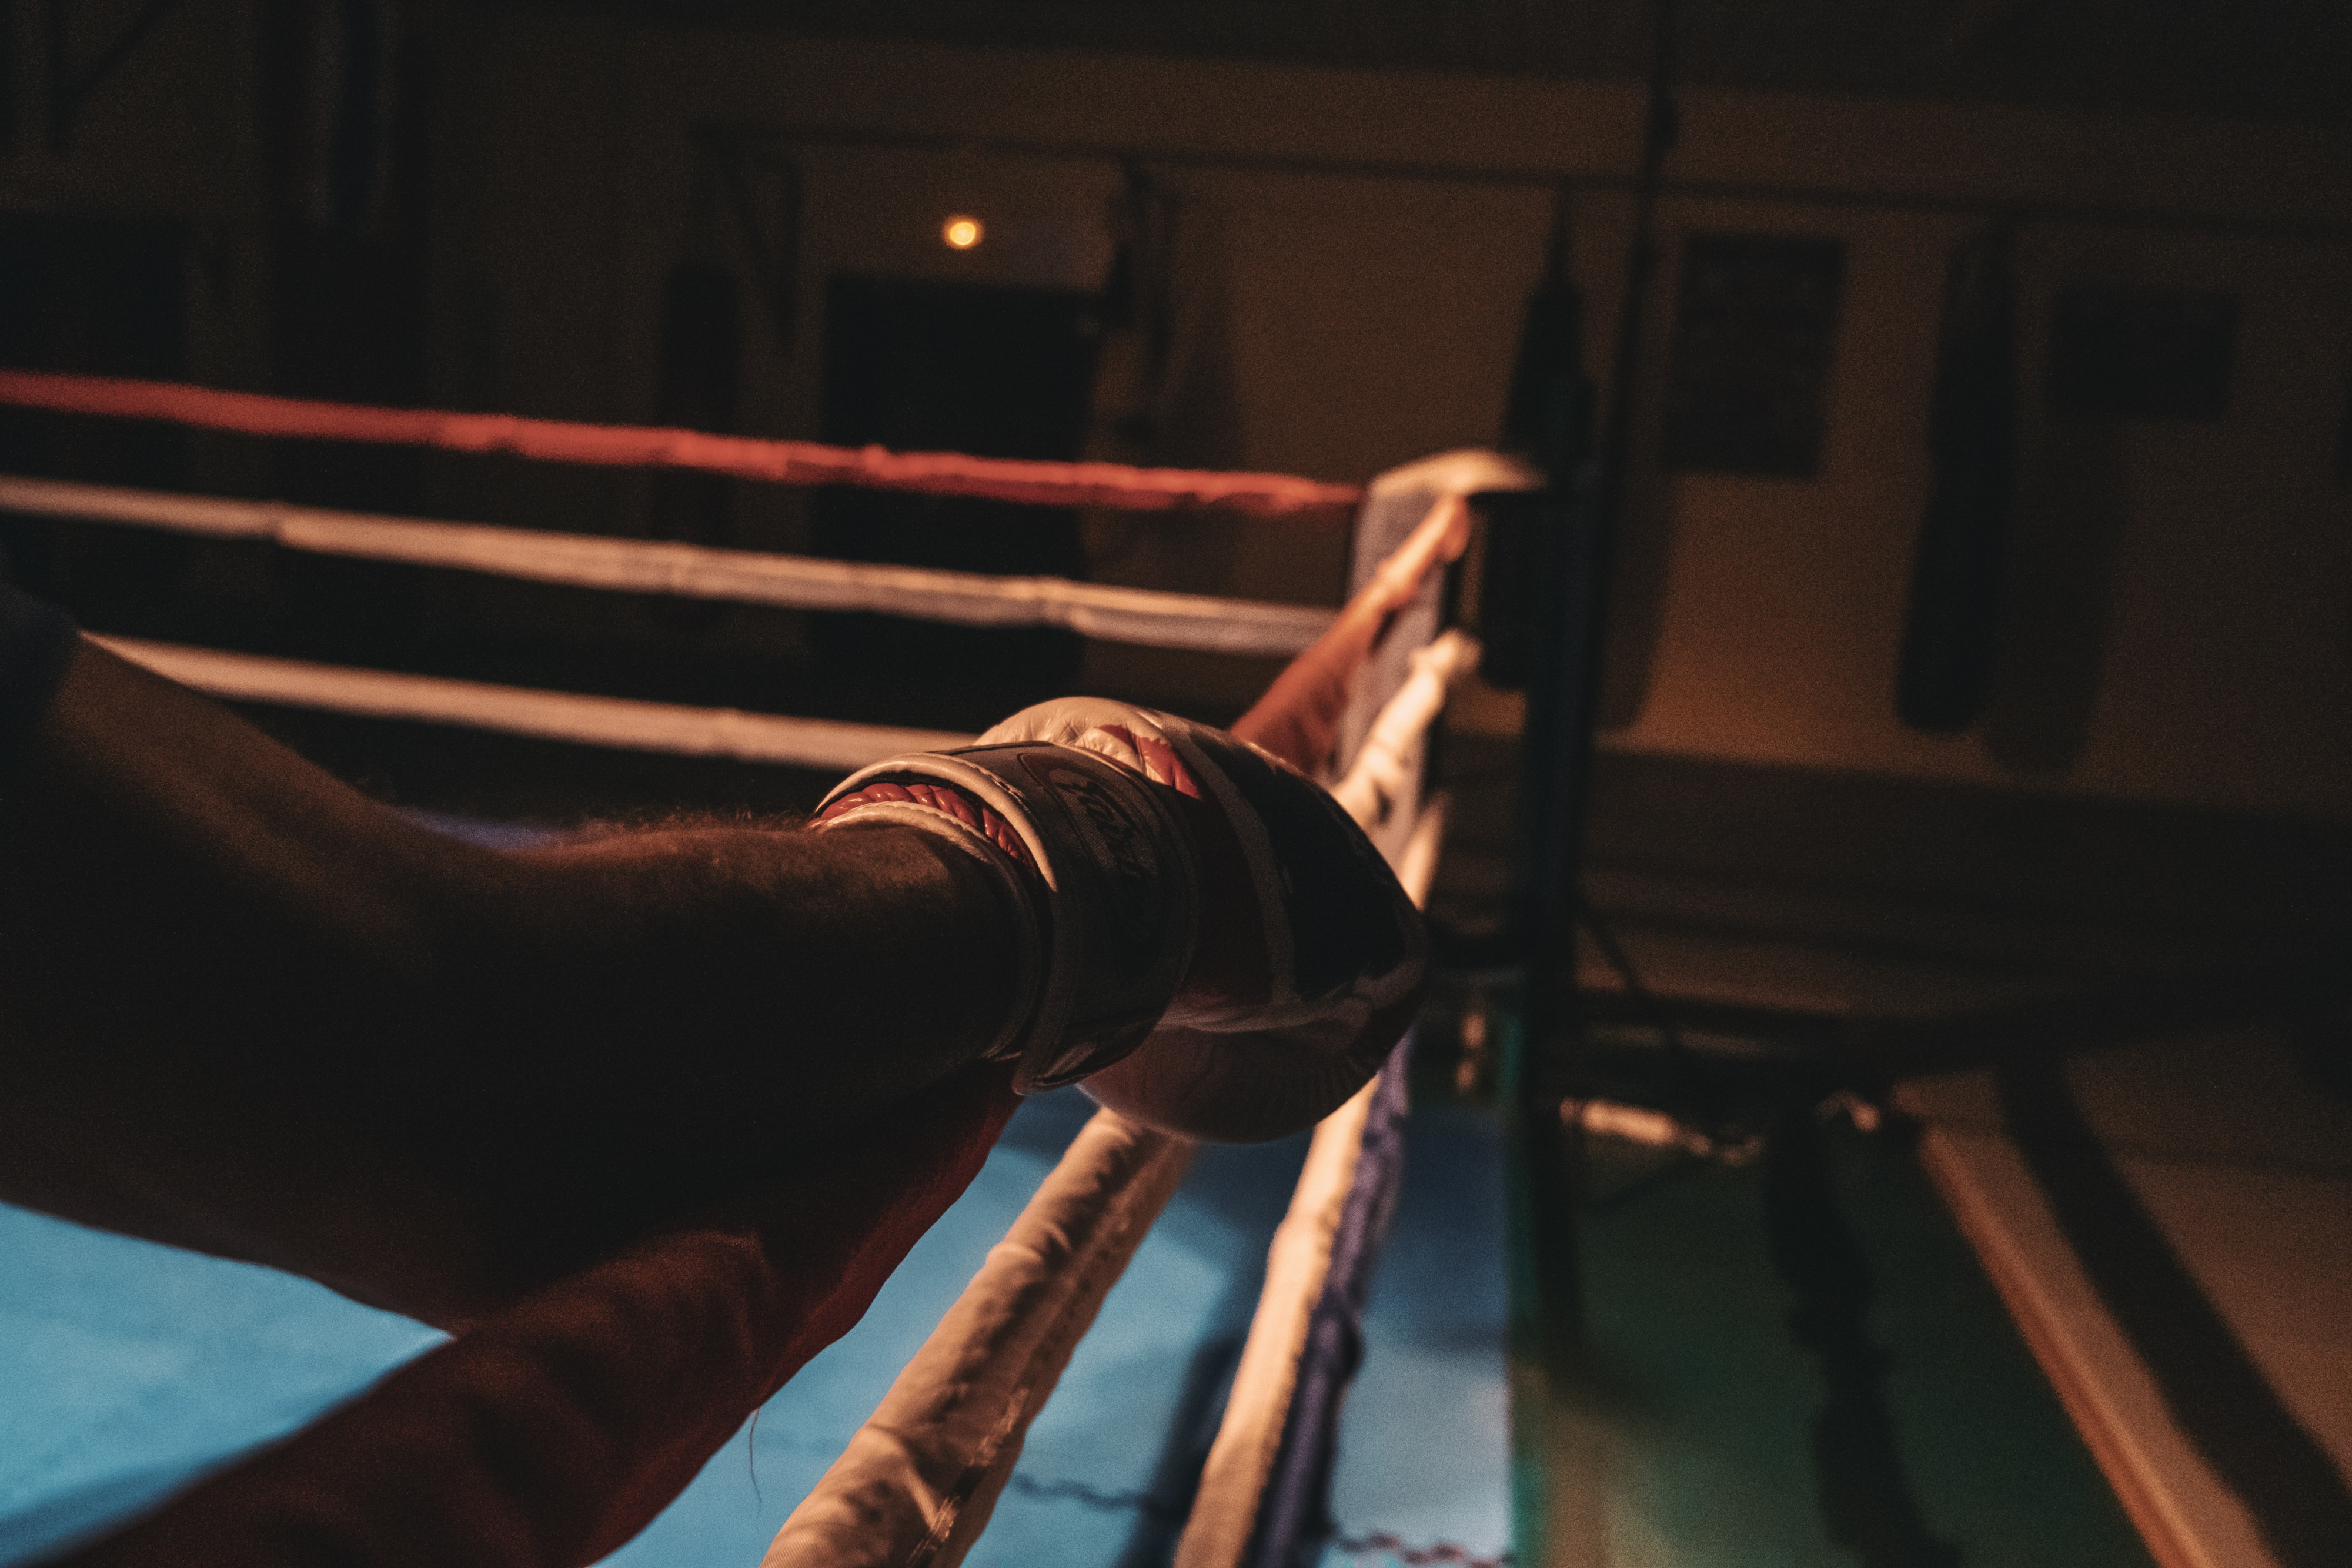 Image of a hand from a person on the side of a boxing ring, leaning on the ropes of the ring